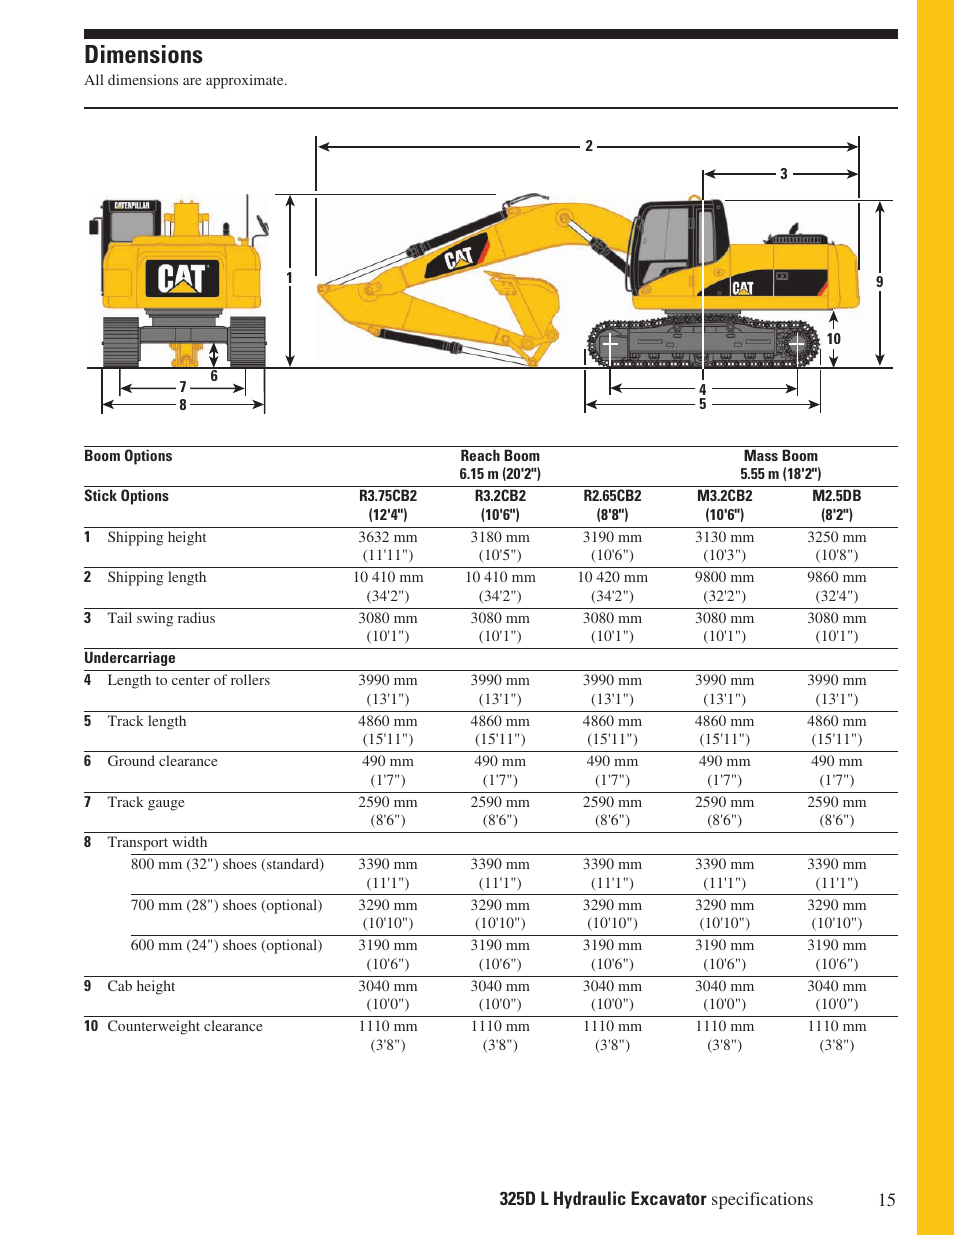 Dimensions CAT Hydraulic Excavator 325DL User Manual Page 15 / 32